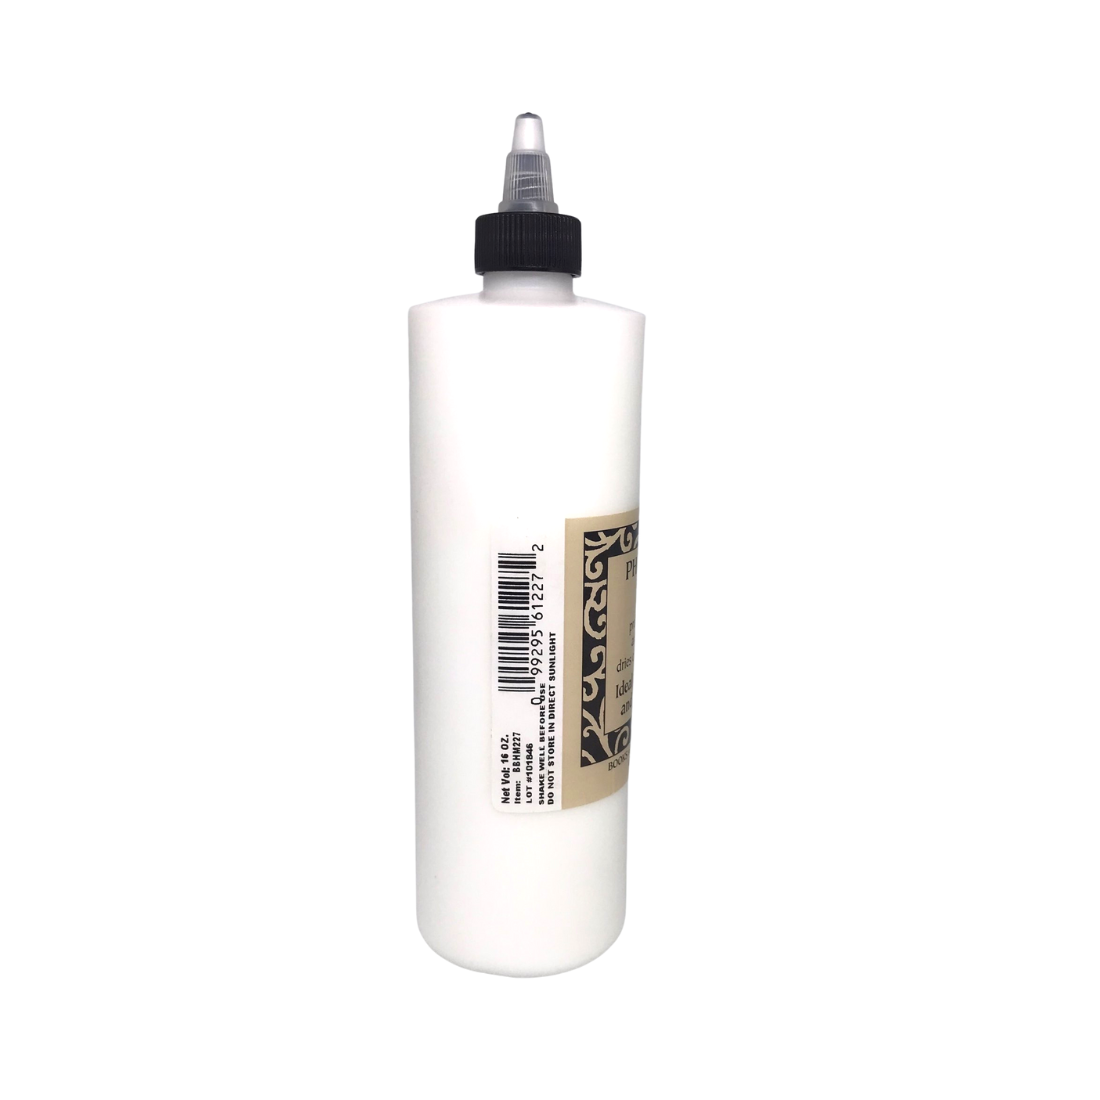 PH Neutral PVA Adhesive Glue for Bookbinding by Lineco – Mondaes